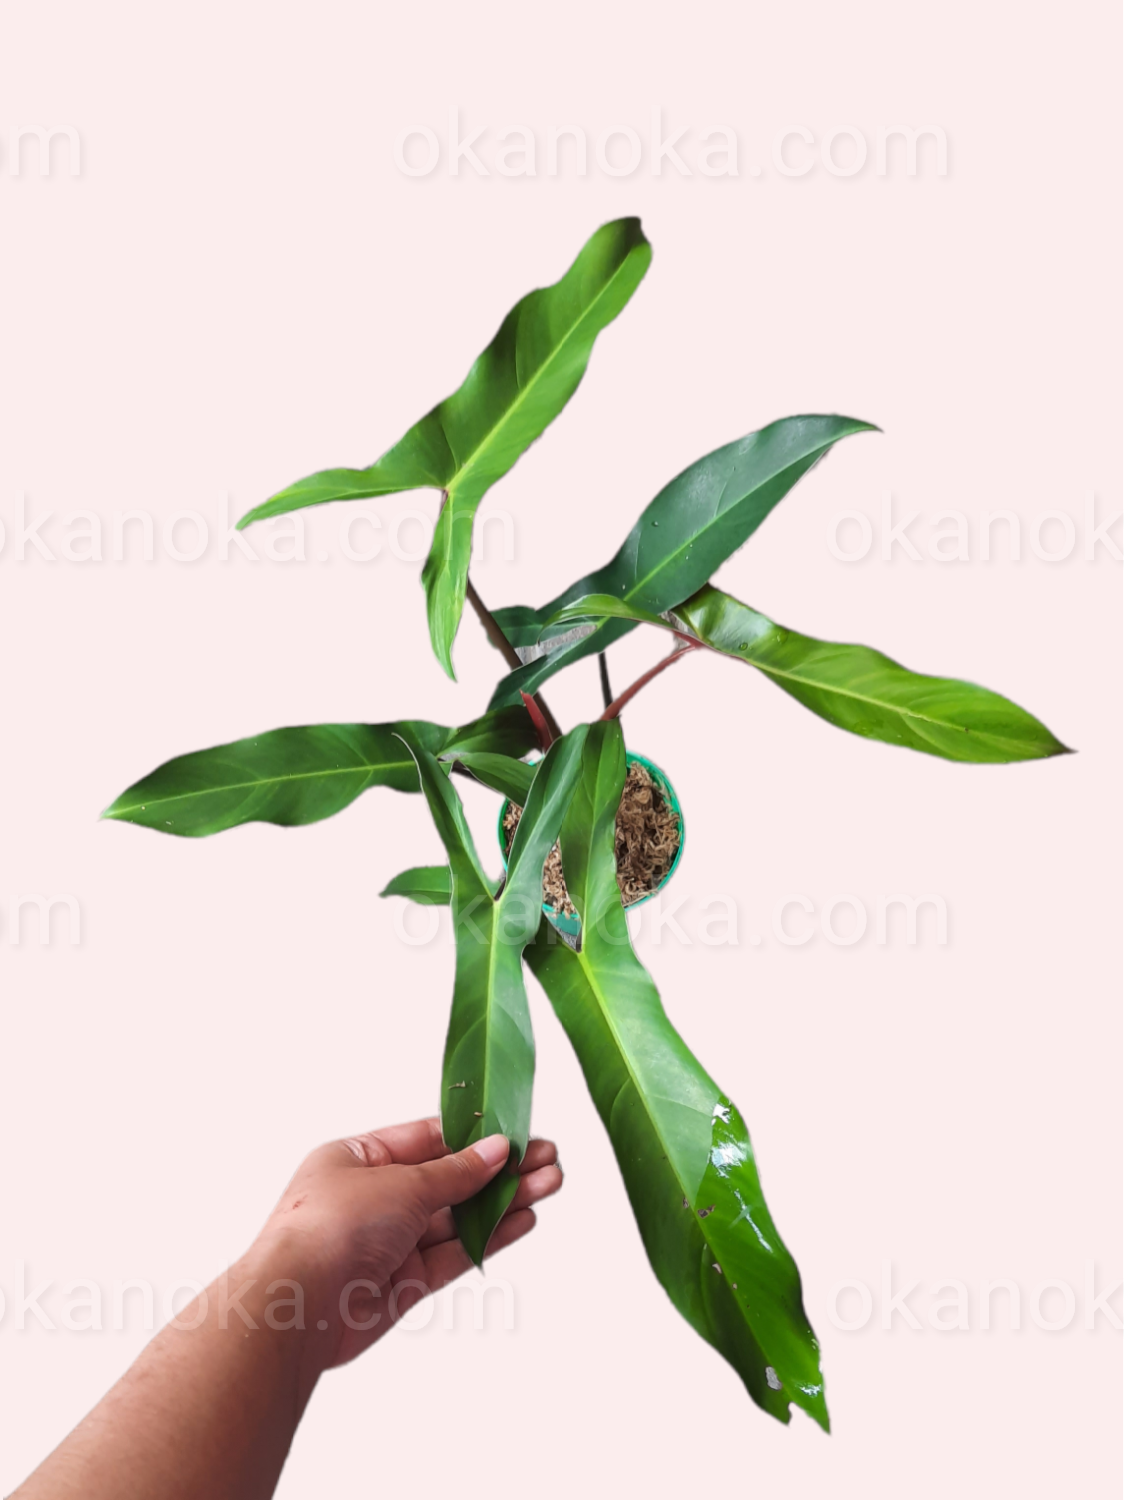 Philodendron Mexicanum, philodendron, live philodendron, philodendron plant, philodendron live plant, live philodendron plant, wholesale philodendron, wholesale philodendron live plant, rare philodendron, live philodendron rare plant, philodendron gloriosum, live philodendron gloriosum, rare philodendron gloriosum, live plant, rare plant, tropical plant, live tropical plant